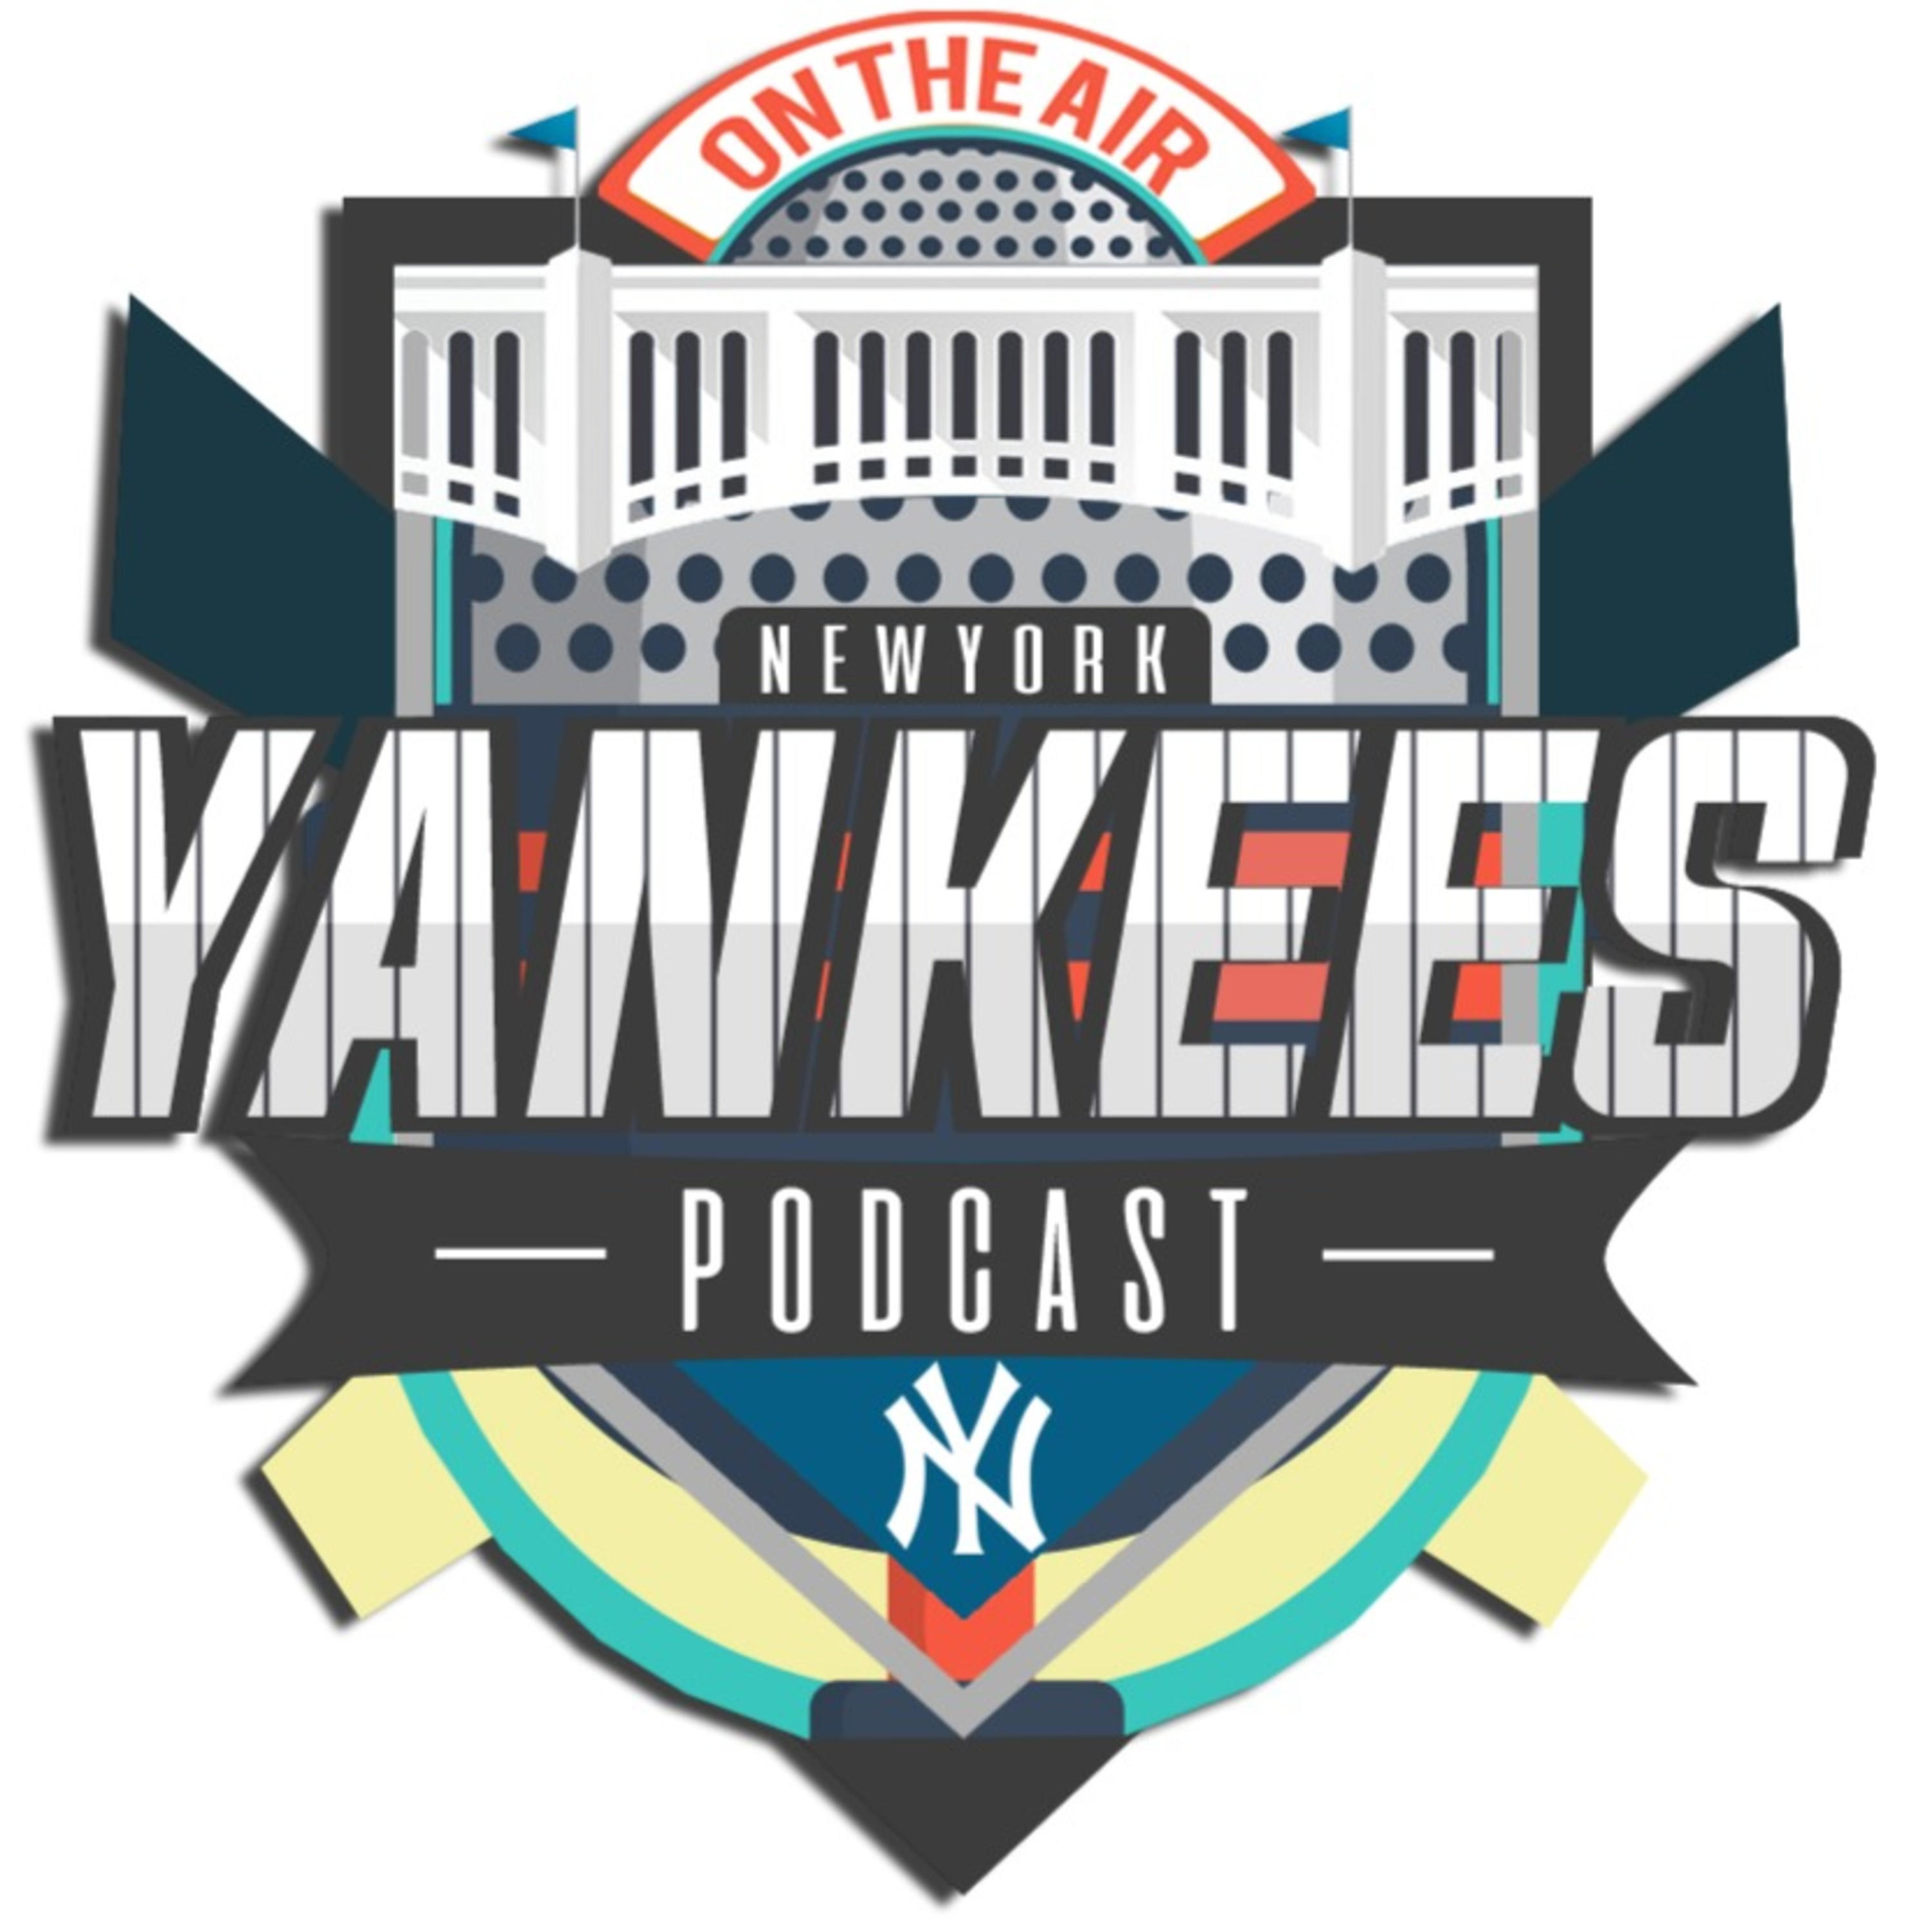 New York Yankees Hungary Podcast - Bé x DS! x Mike - S06EP13